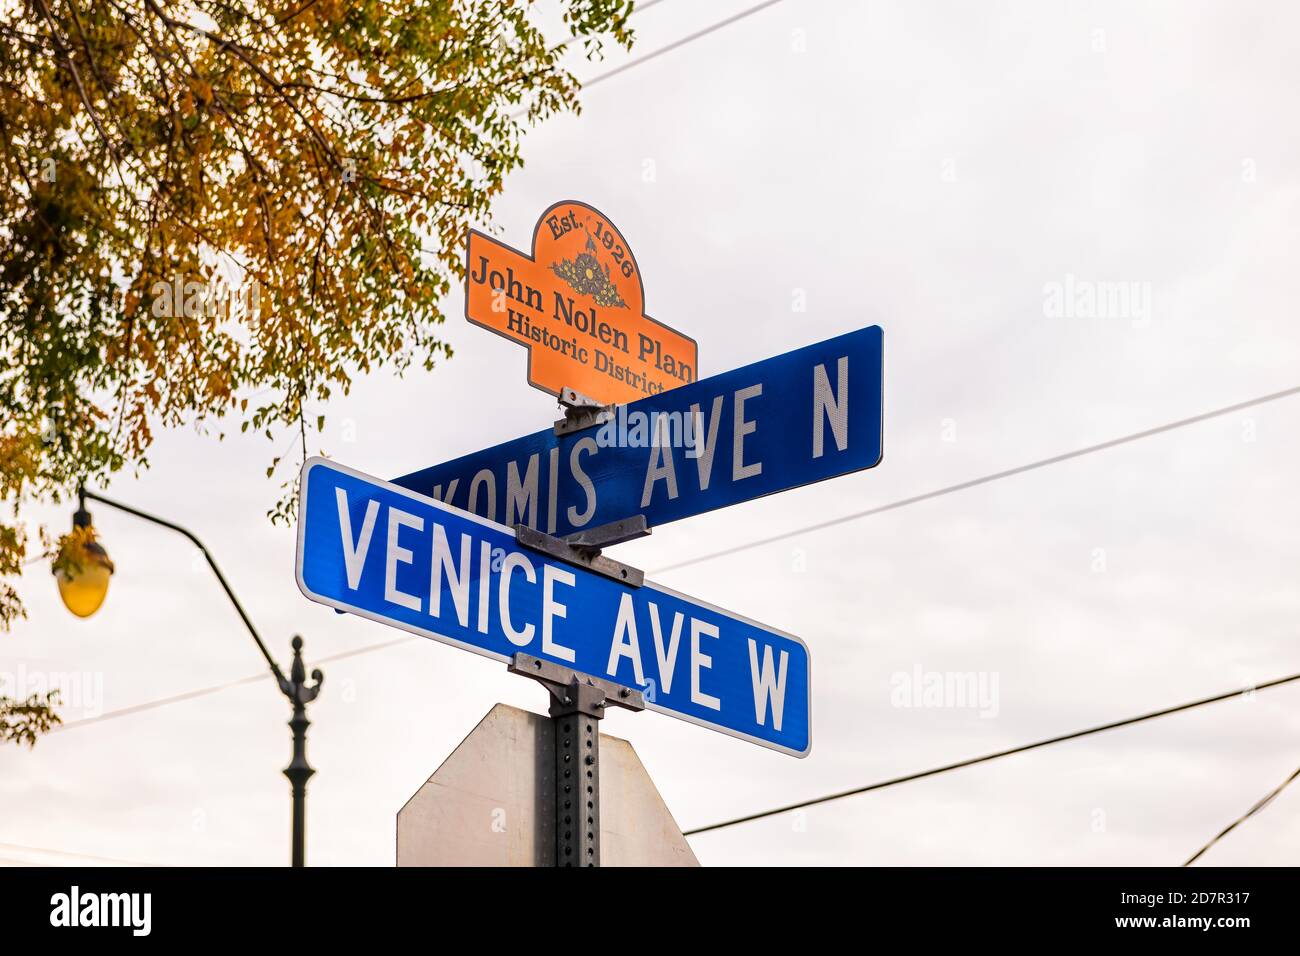 Venice, USA - April 29, 2018: Sign post in small Florida city town in gulf of Mexico with cloudy sky and text for west avenue historic district John N Stock Photo